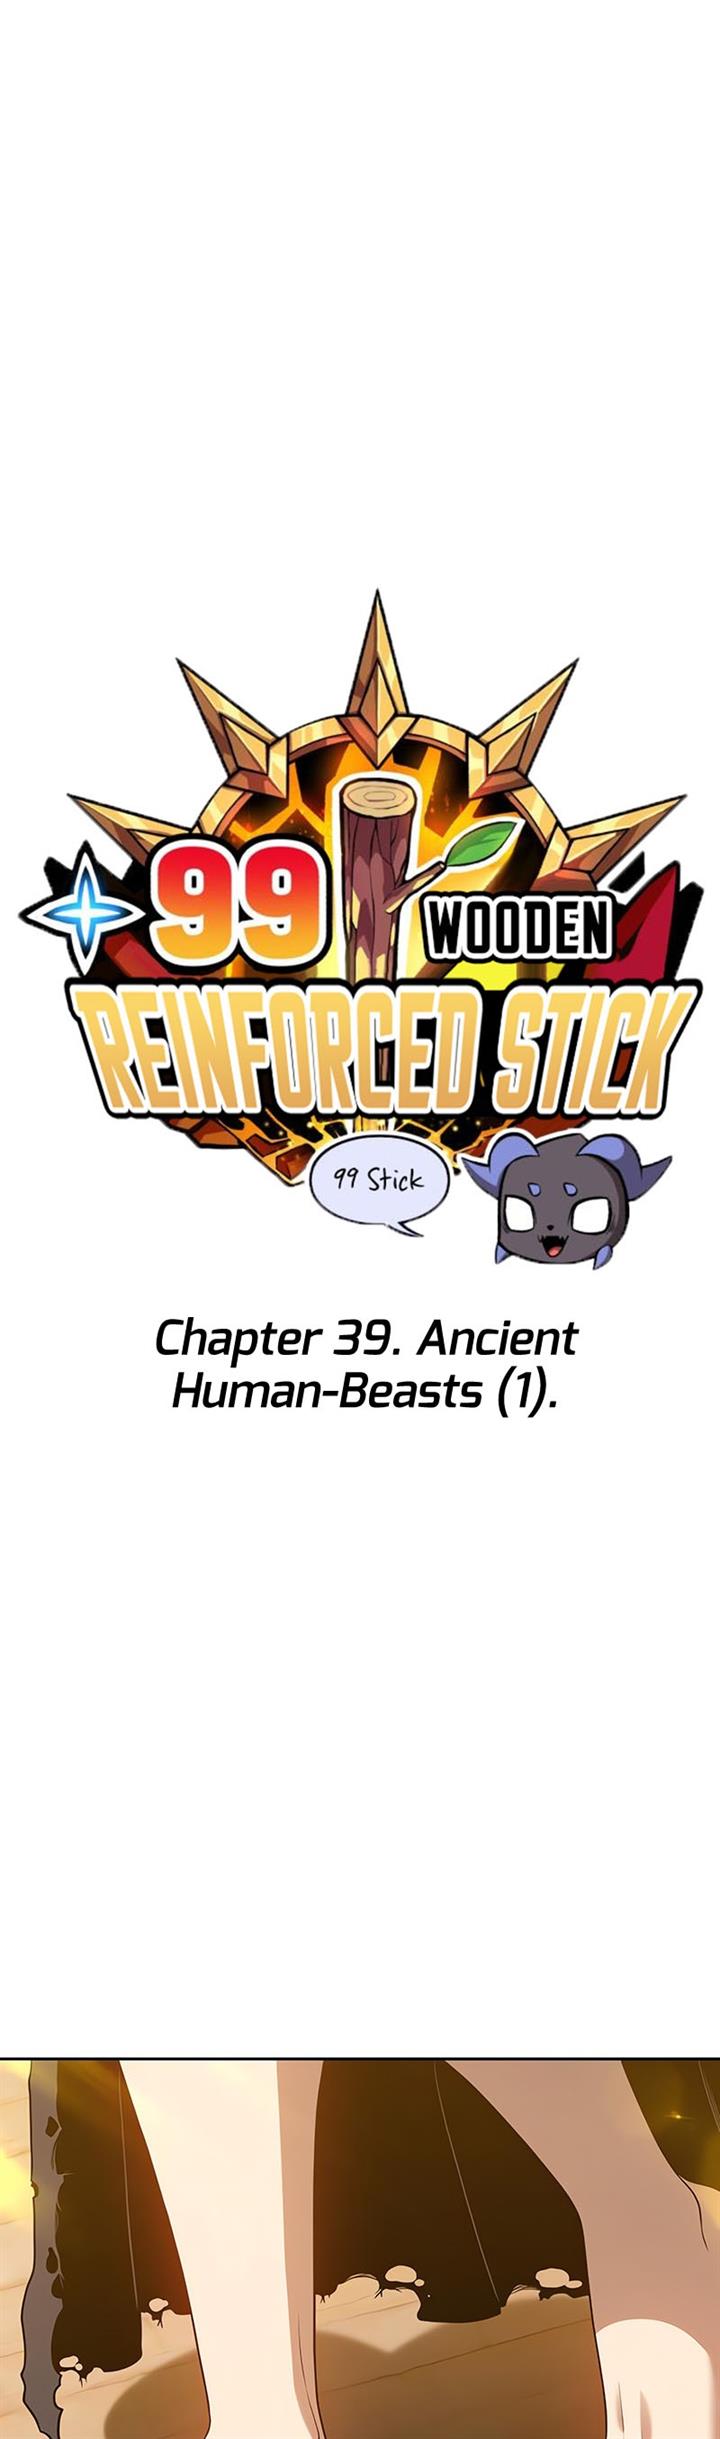 +99 Wooden Stick Chapter 39